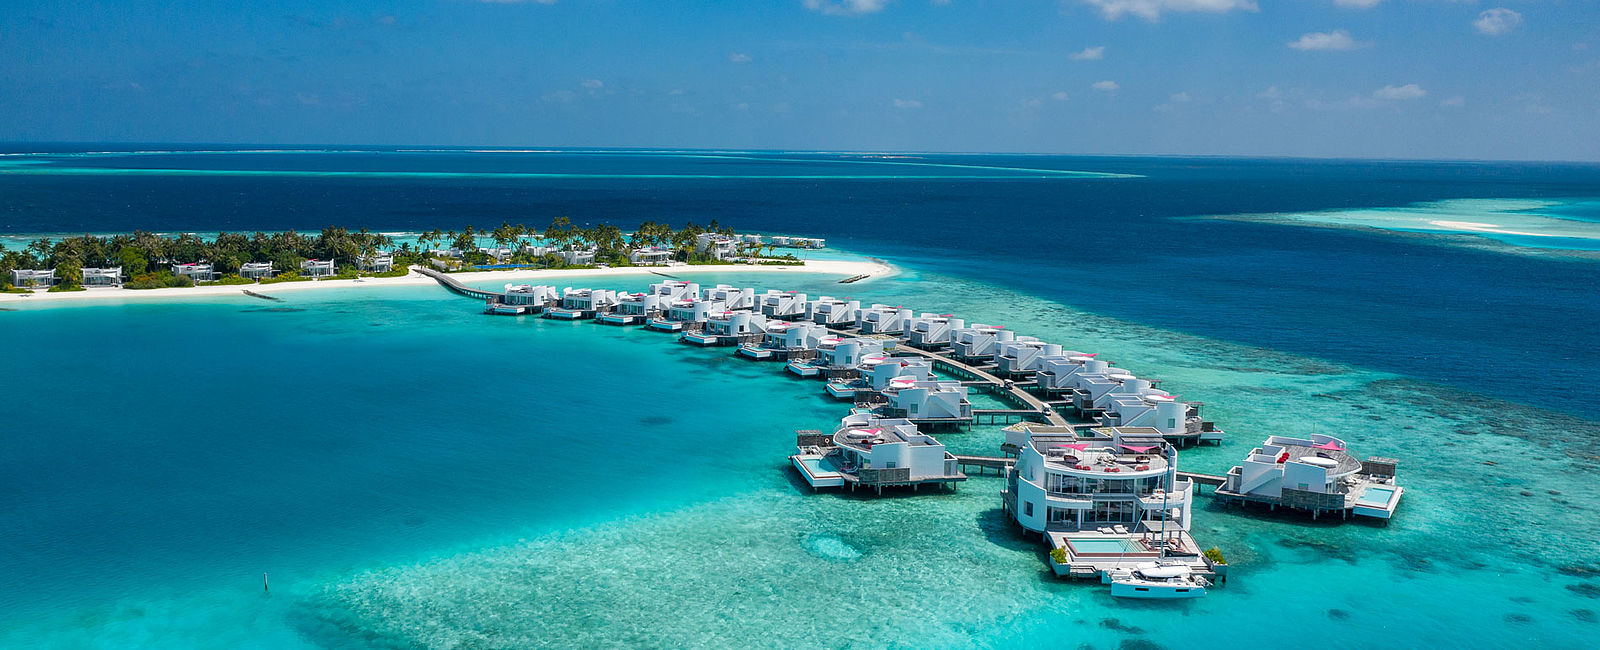 HOTEL TIPPS
 LUX* North Male Atoll 
 Penthouse Paradise Retreat 